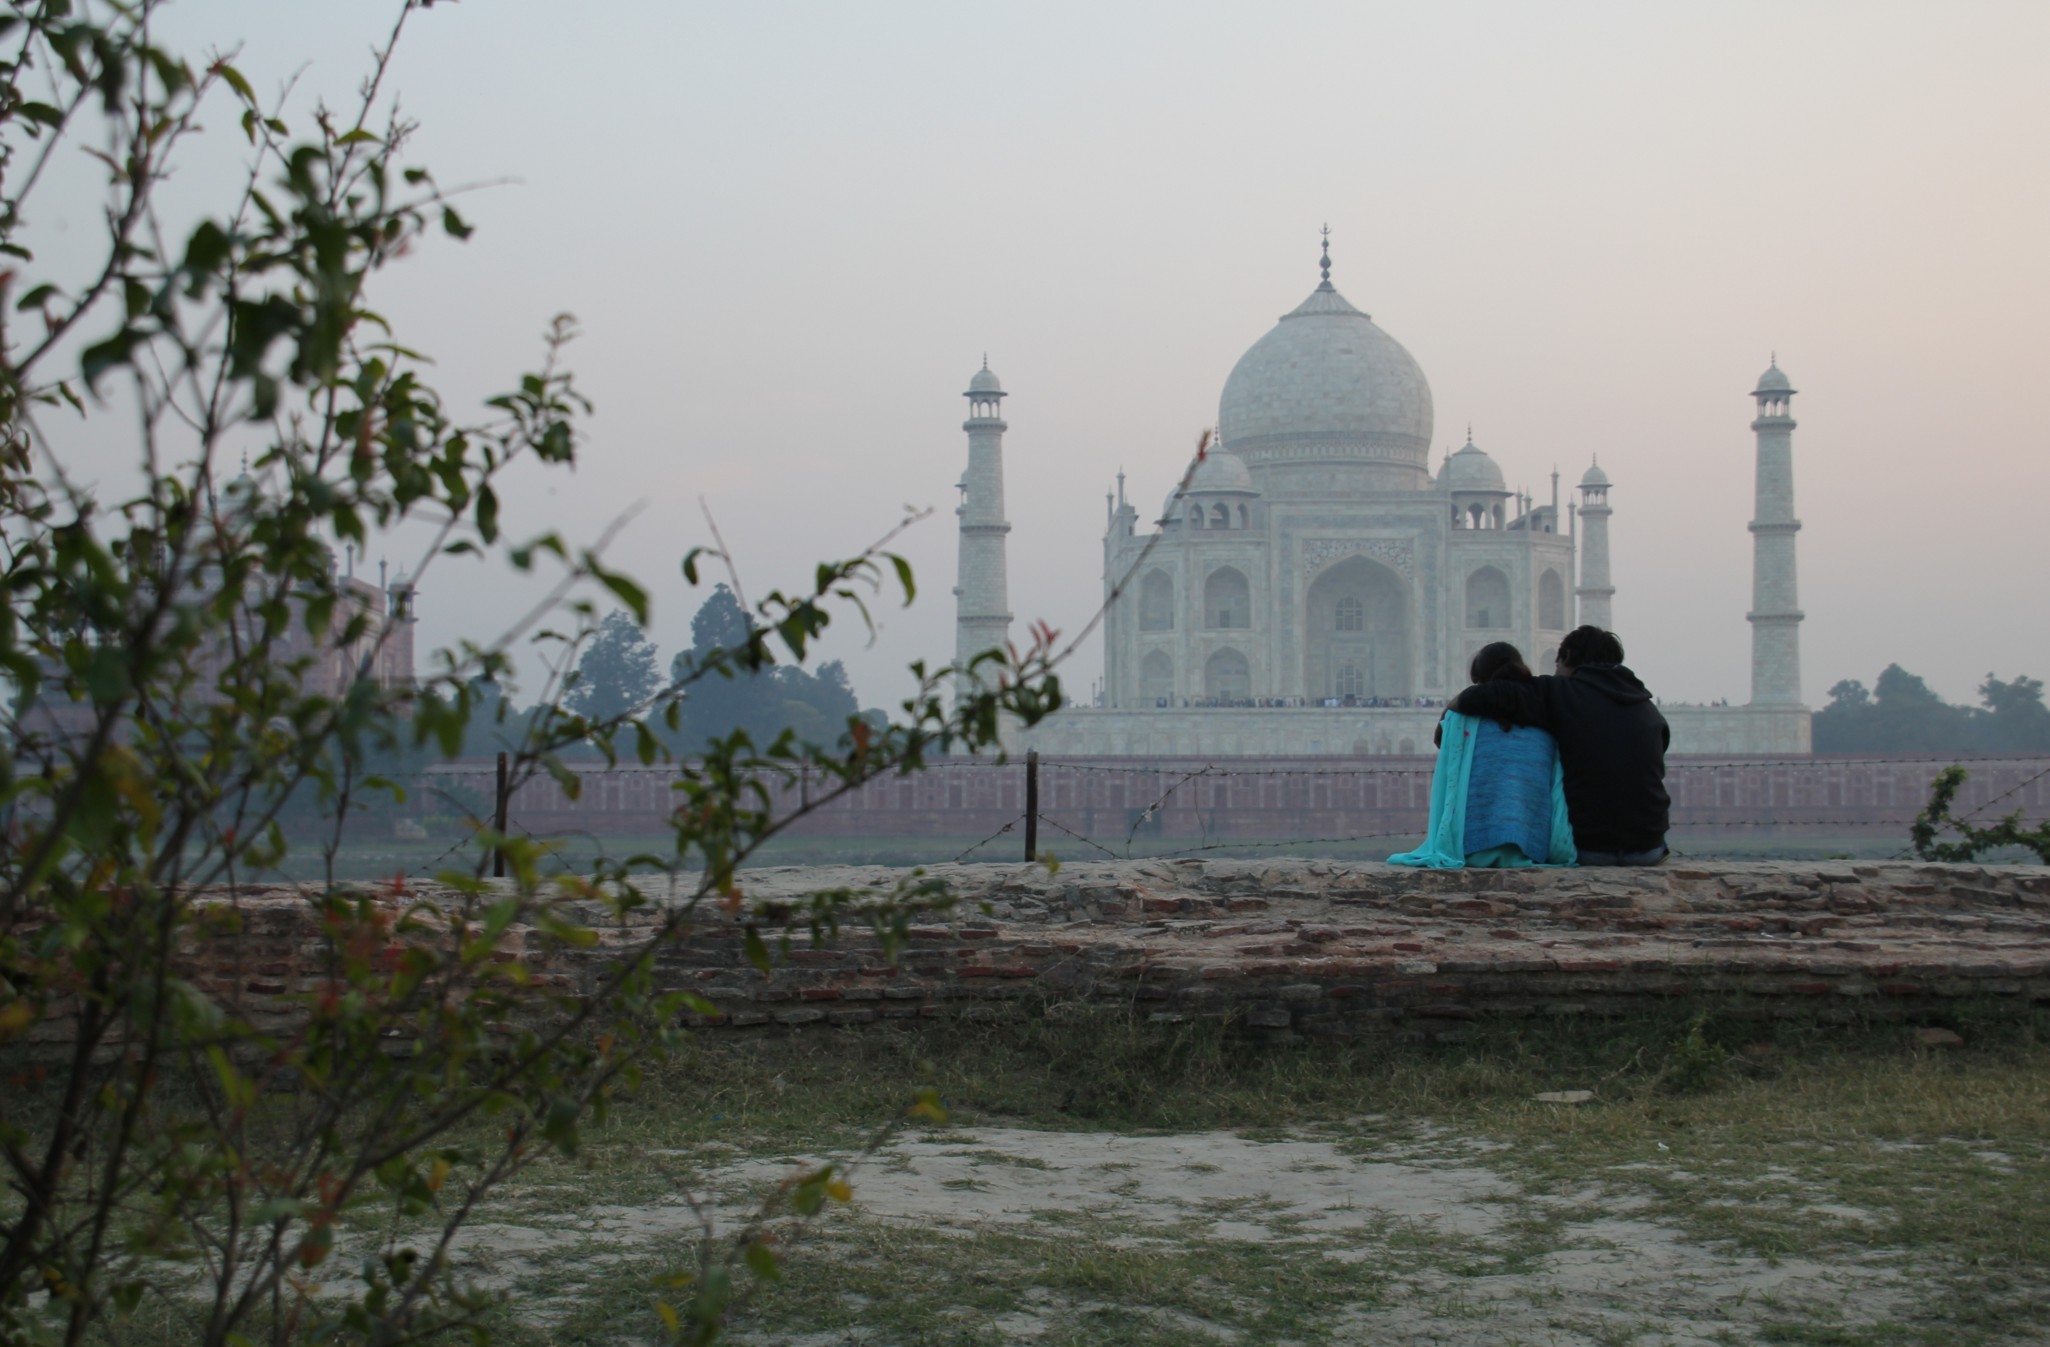 An Indian couple is entranced by the view of the Taj Mahal at sunset from Mehtab Bagh Park in Agra, India.